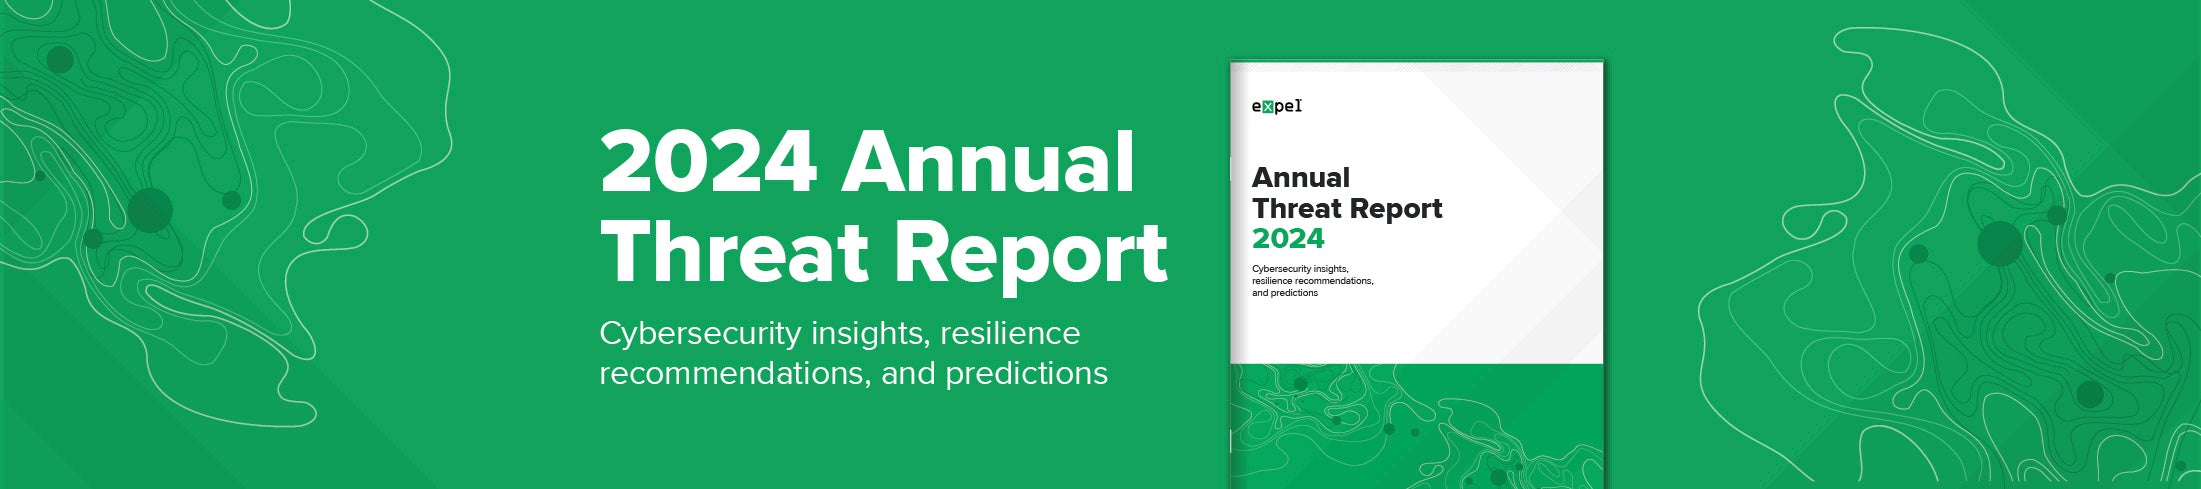 Expel annual threat report 2024: cybersecurity insights, recommendations, and predictions